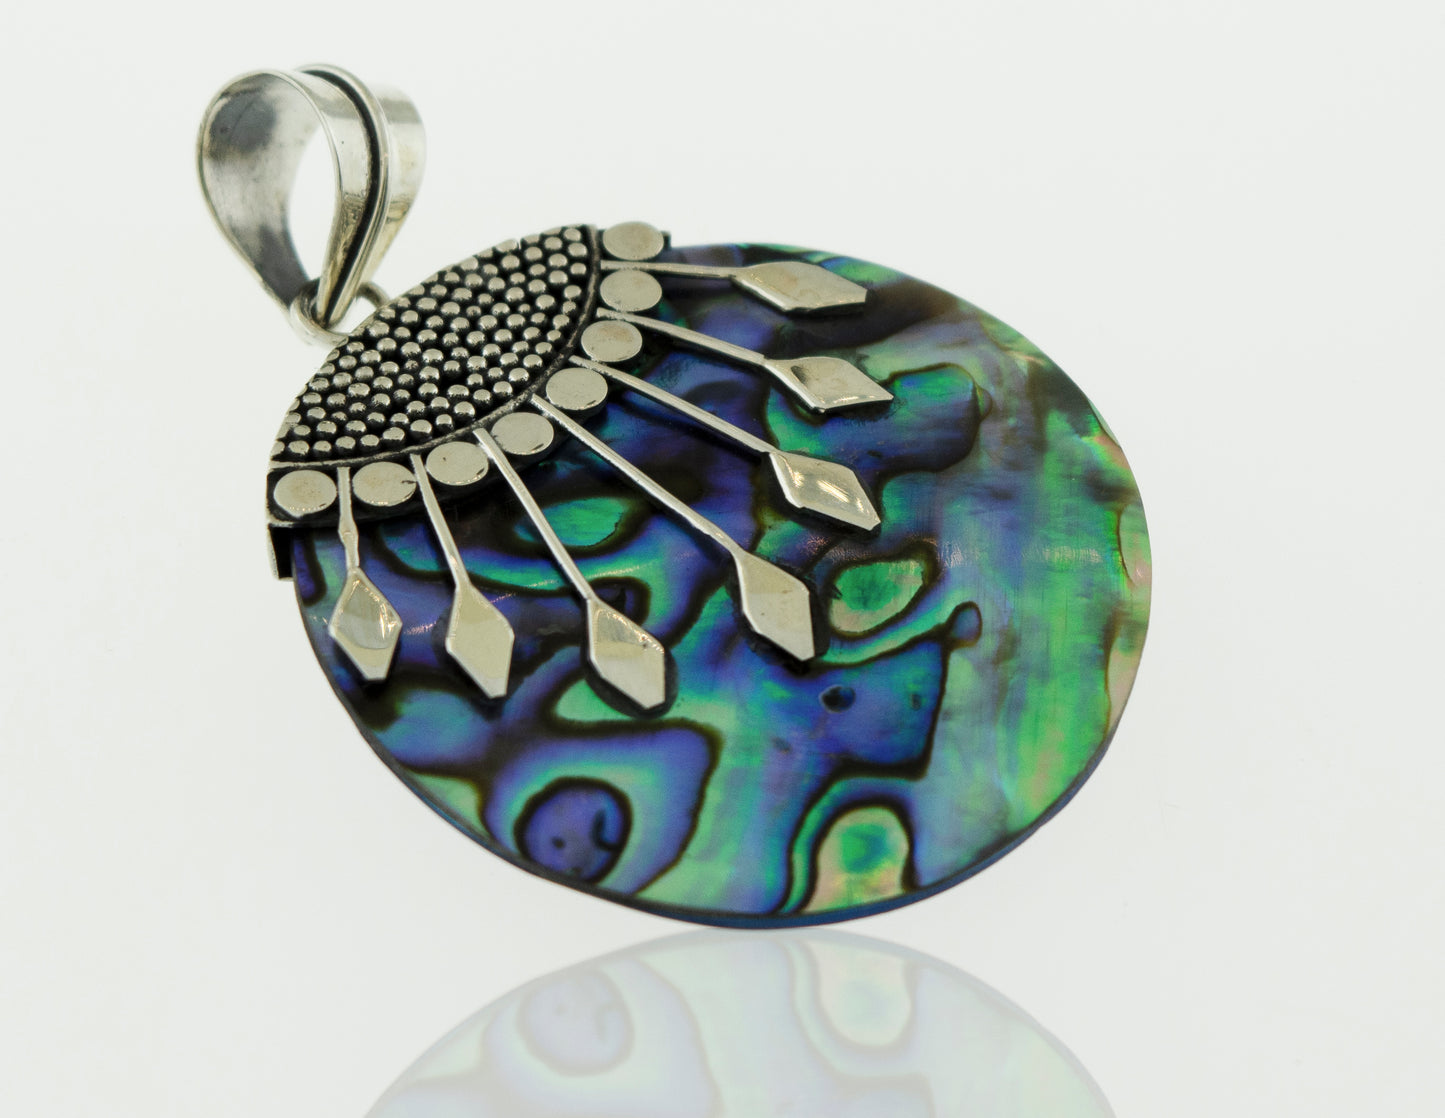 A Super Silver Circle Abalone Pendant with Bali detail made of .925 Sterling Silver, placed on a white surface.